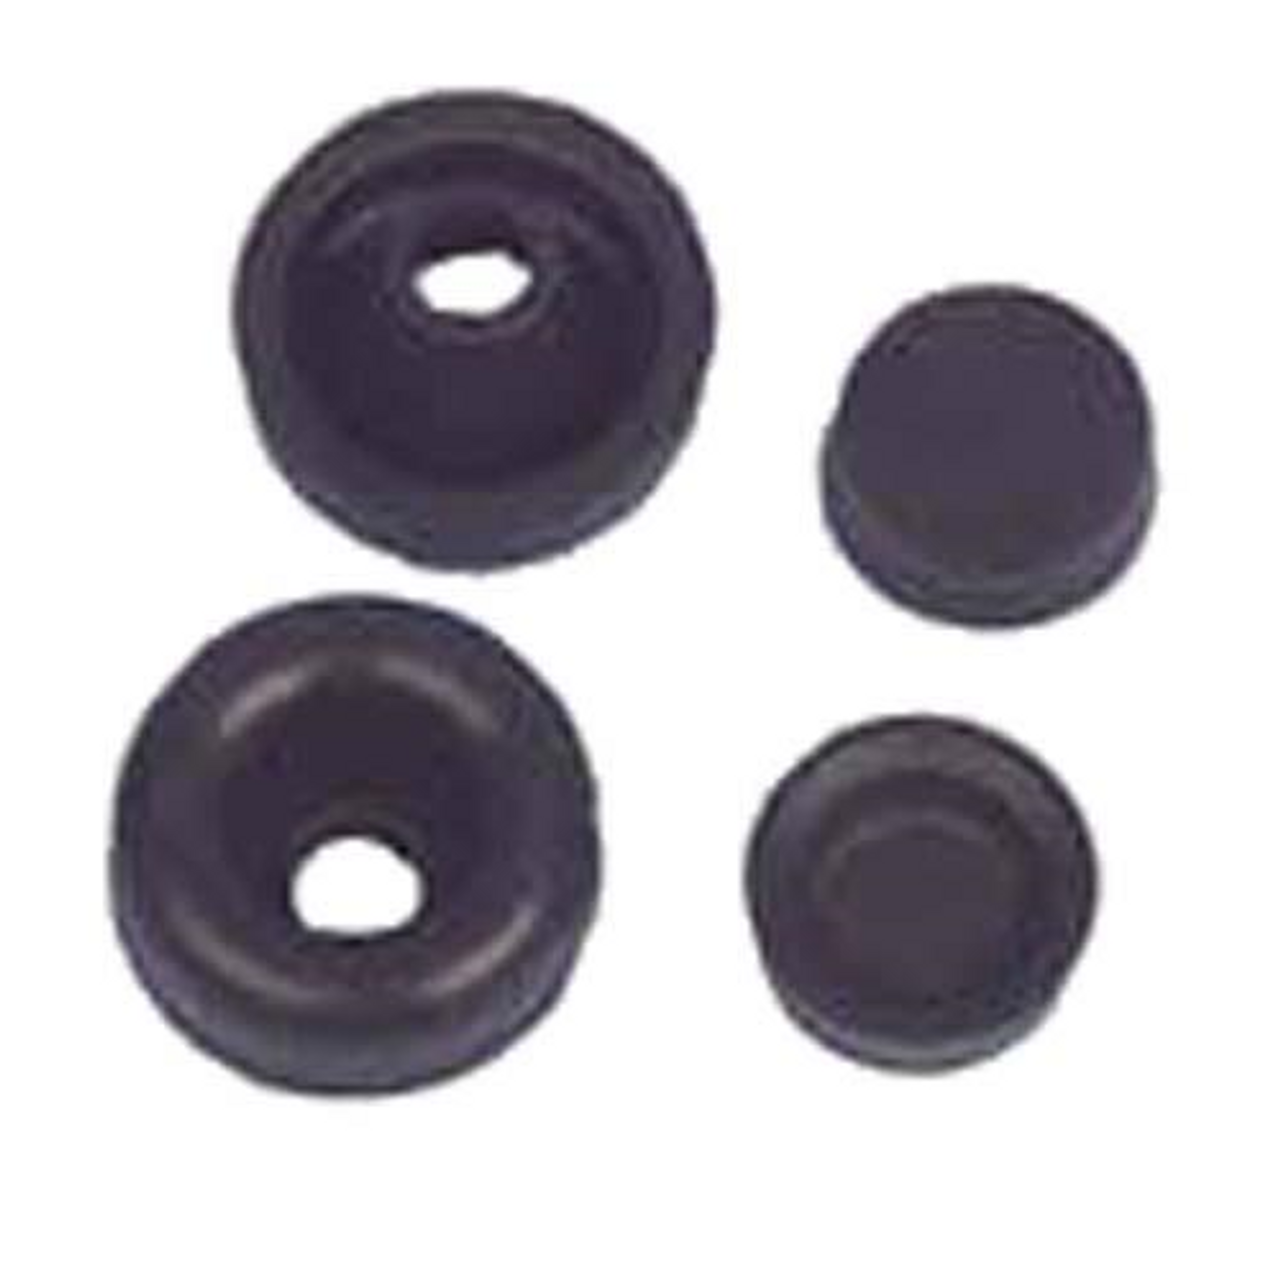 Wheel Cylinder Repair Kit. Includes Two Cups And Two Boots. One Kit Required Per Cylinder. For Use In #4255, 4243, 811775